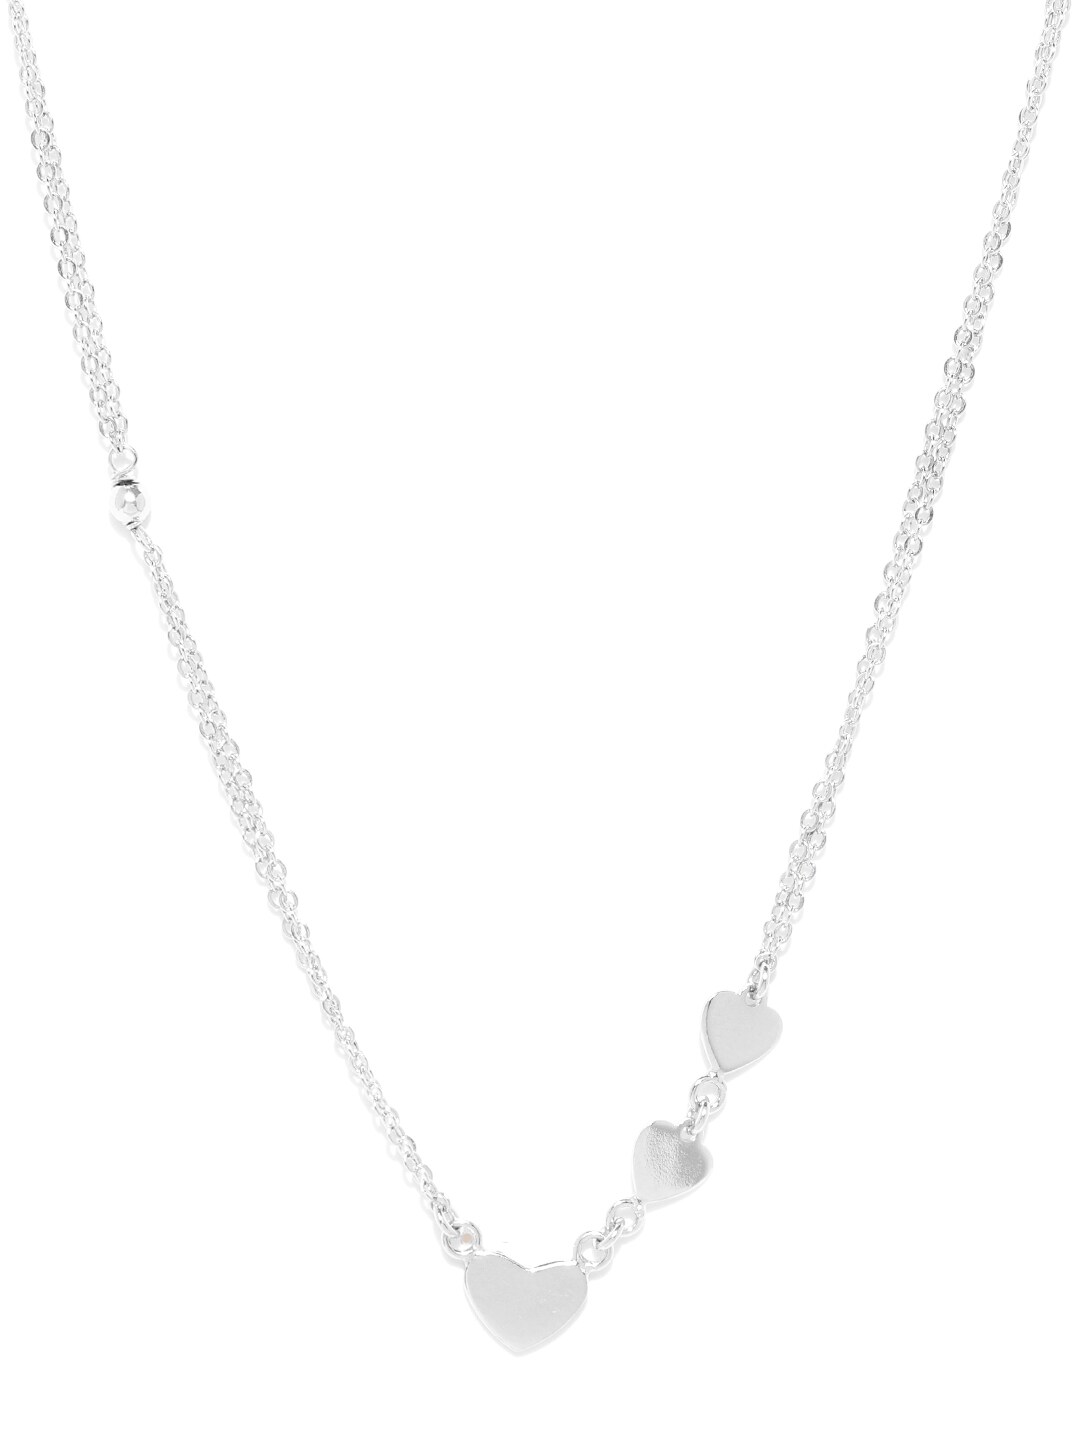 Carlton London Silver-Toned Rhodium-Plated Heart-Shaped Dual-Stranded Necklace Price in India